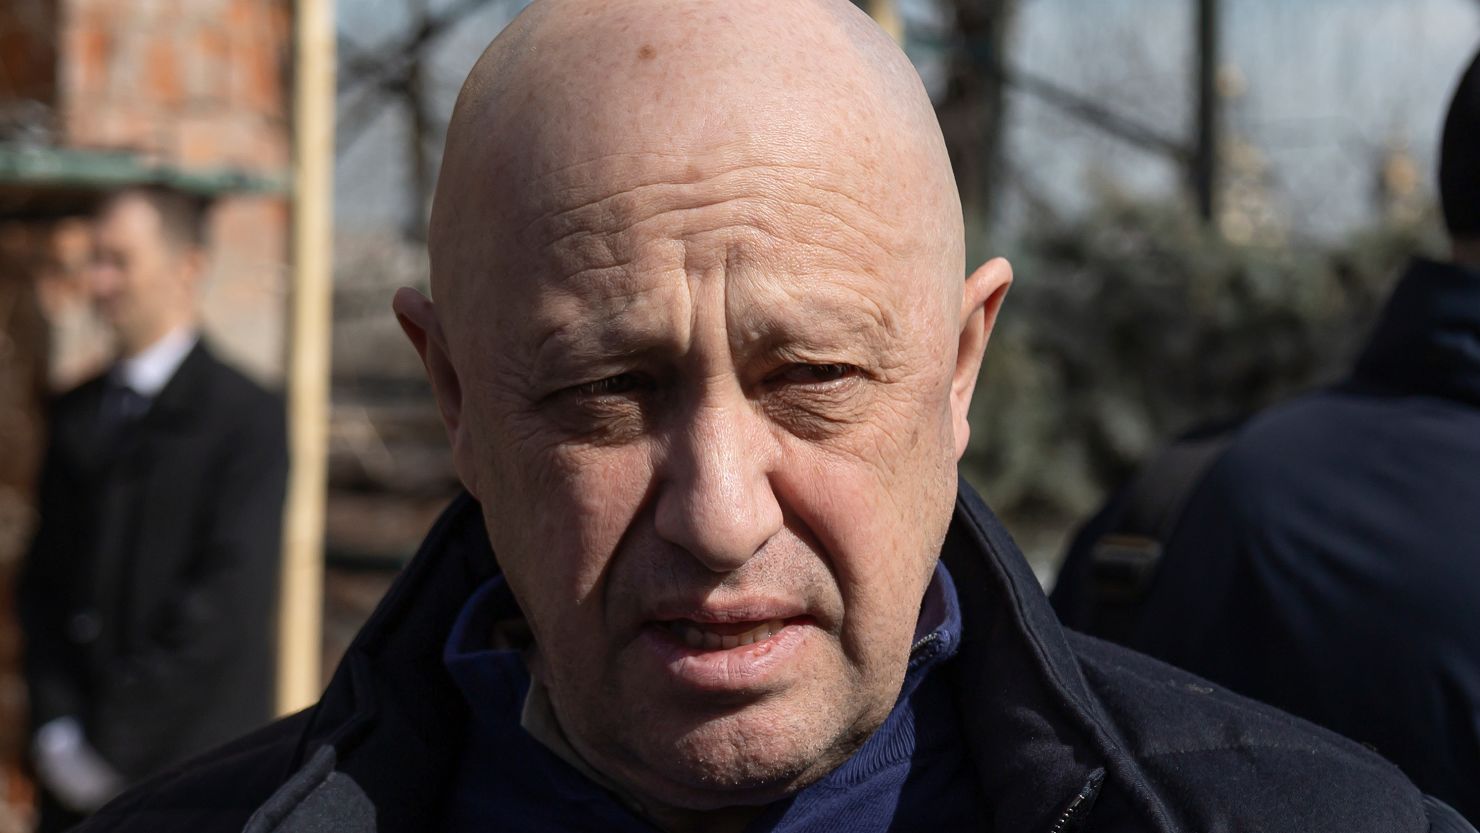 Just days ago, Yevgeny Prigozhin, the owner of the private military group Wagner, warned Russia will suffer "serious losses" on the battlefield in the war against Ukraine.